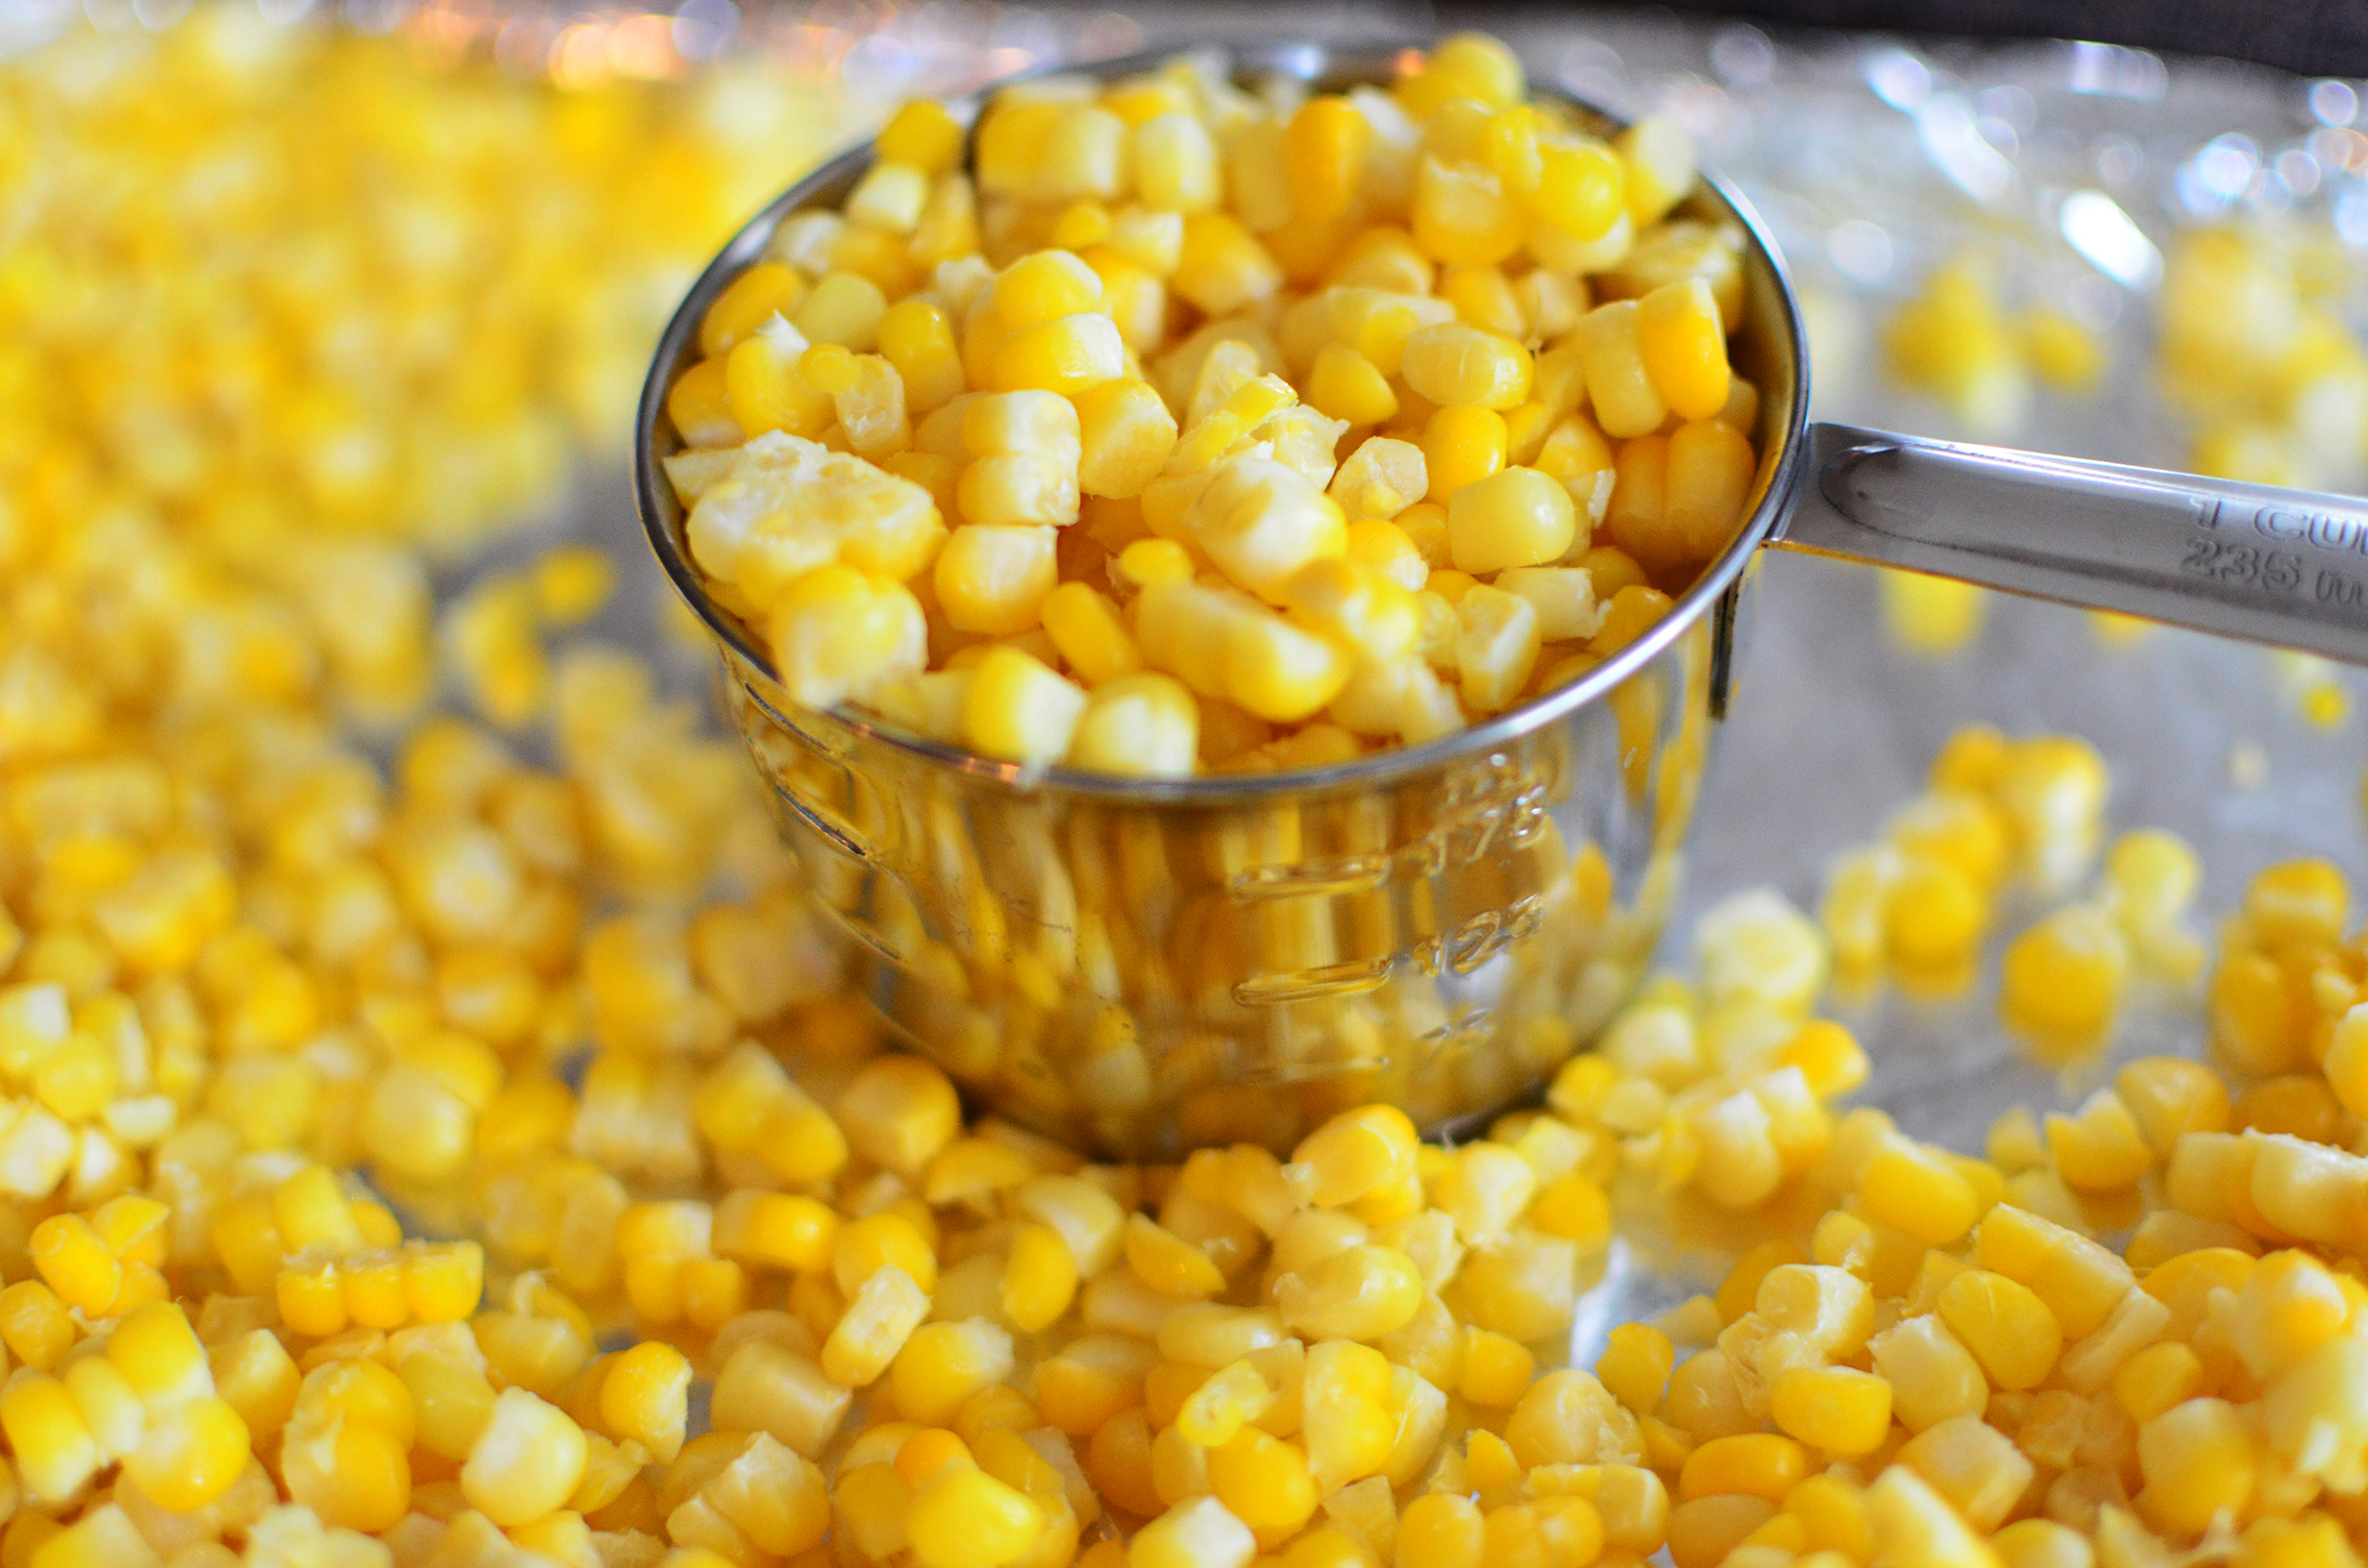 Pour the corn into individual ziploc bags and freeze it for up to 12 months...